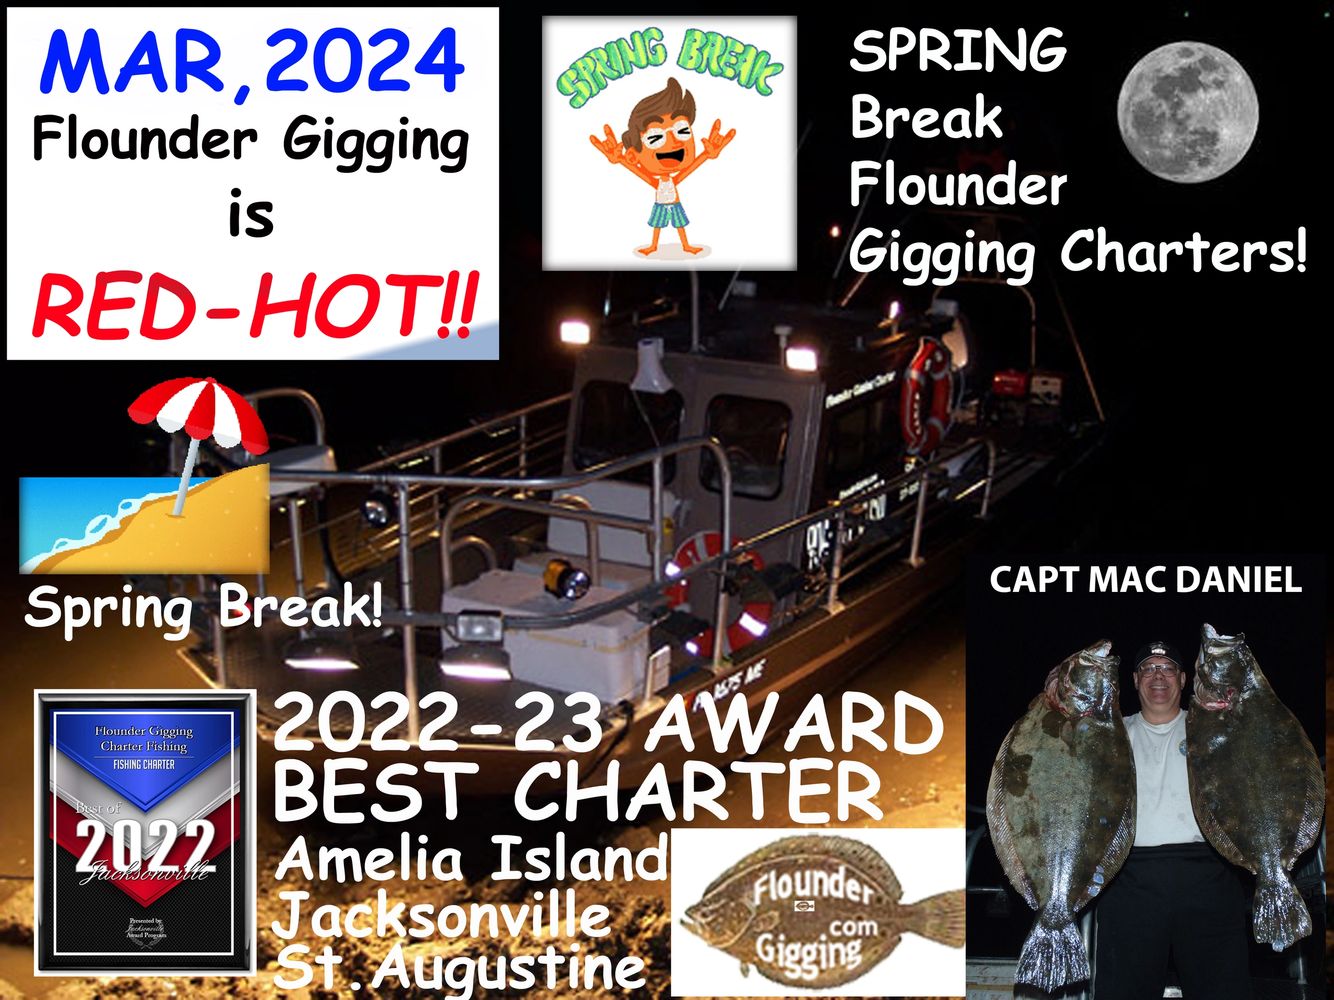 Our boat, the Flounder Barge, by the edge of the water in March, 2024. Text us at 904-556-0230.